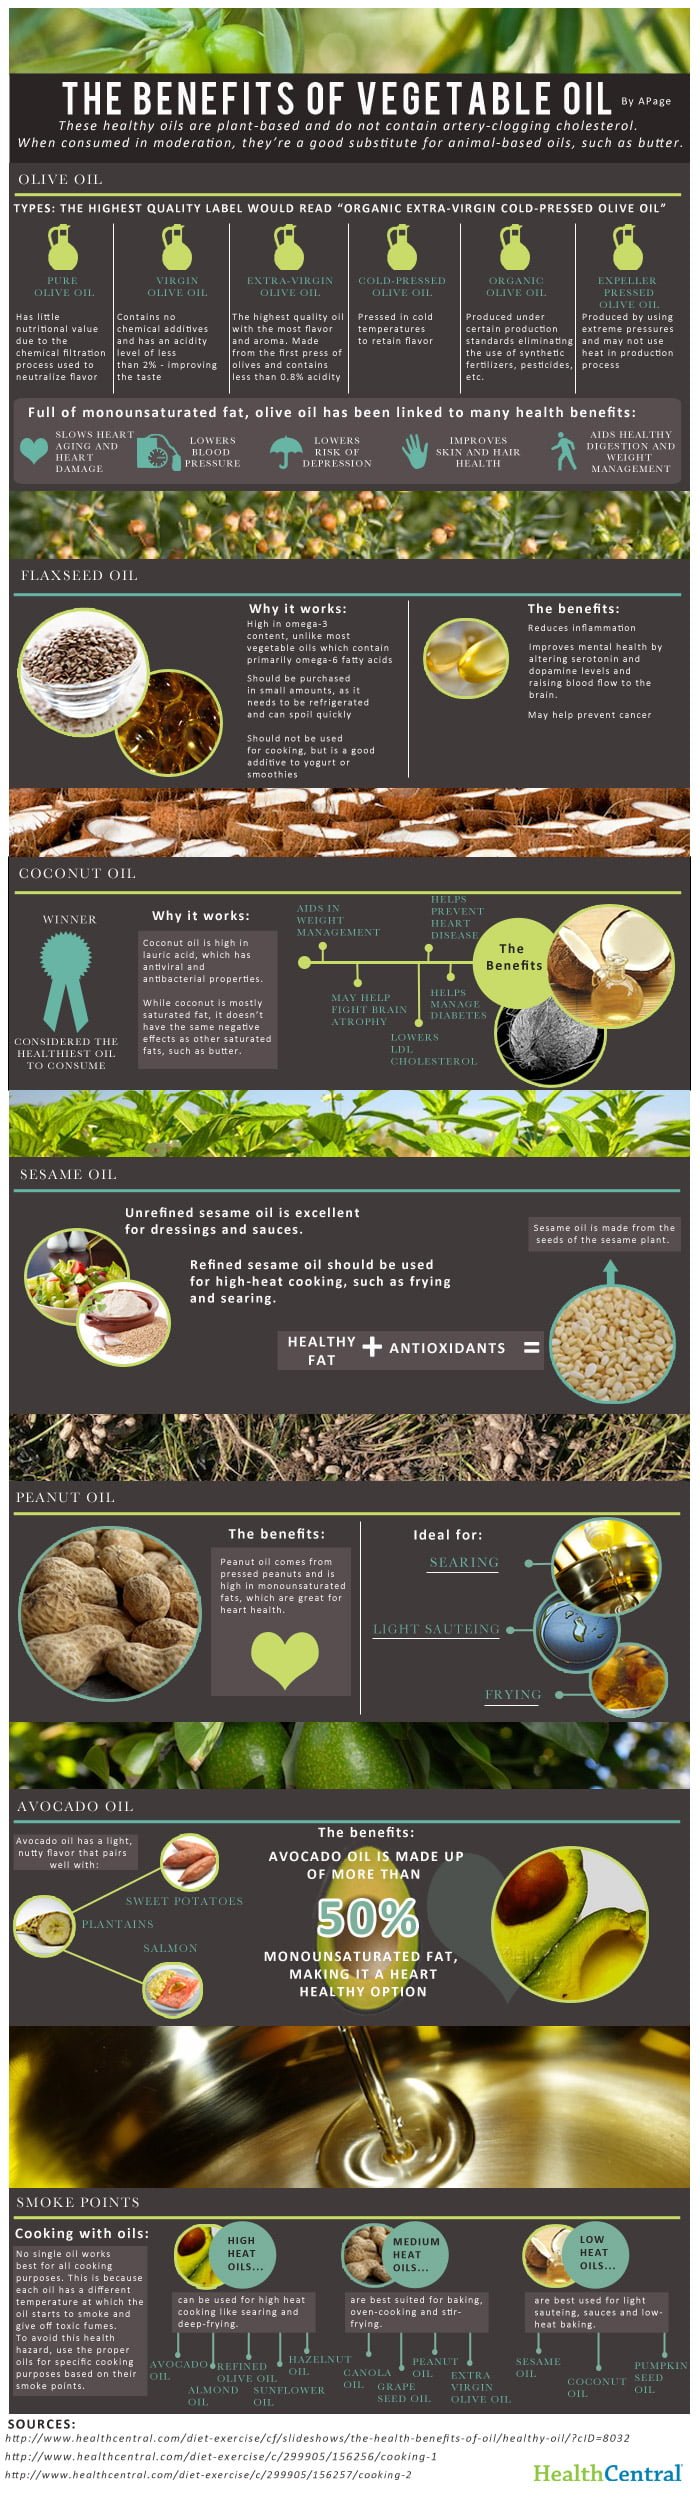 The Benefits of Vegetable Oil Infographic